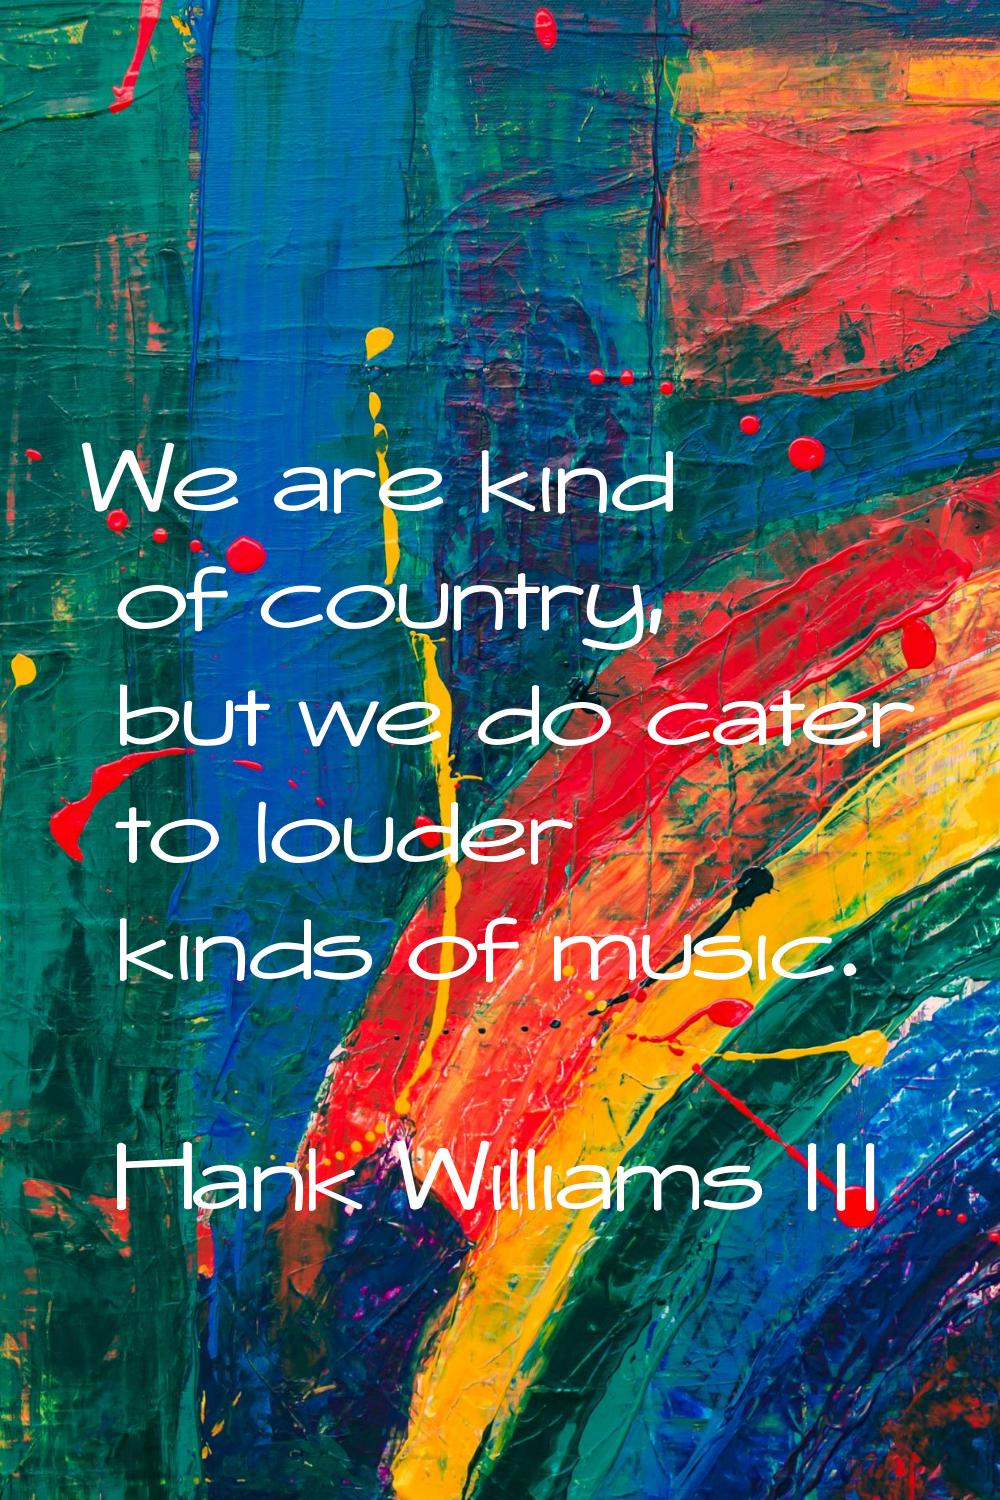 We are kind of country, but we do cater to louder kinds of music.